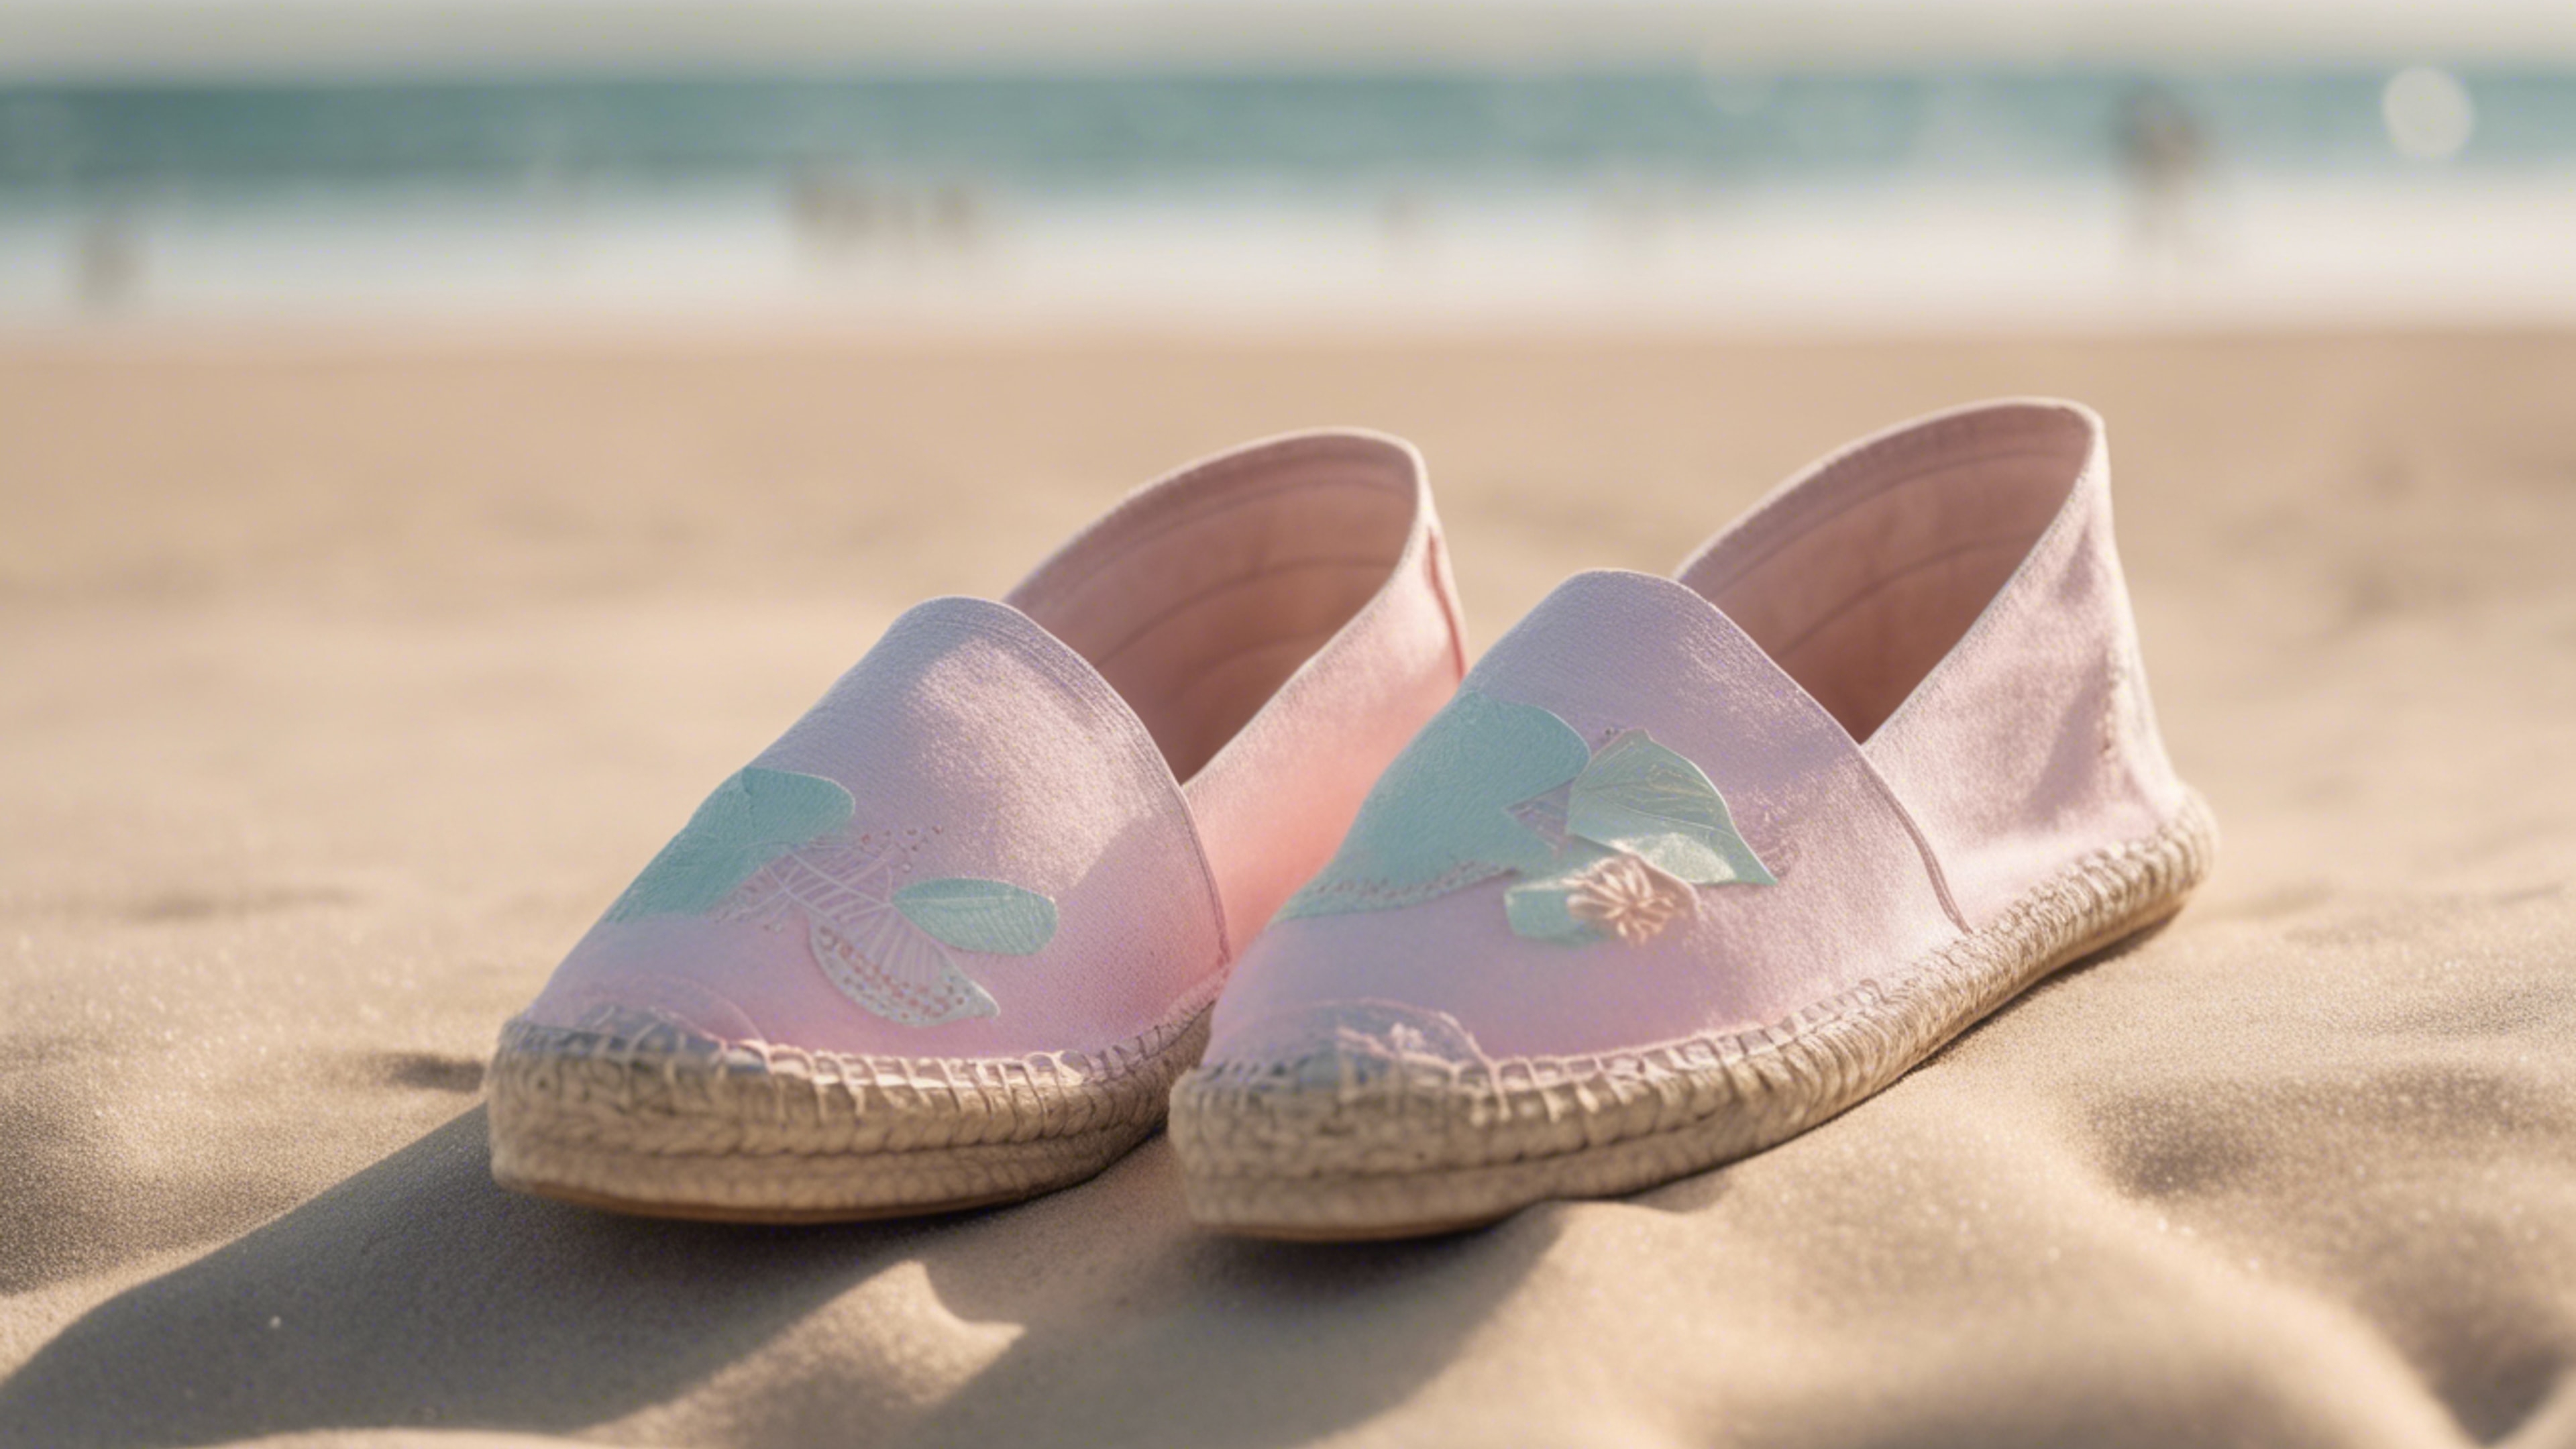 A shot of pastel-colored espadrilles, a perfect preppy summer footwear choice, against a backdrop of a sandy beach. Wallpaper[fecf11016962422c9305]